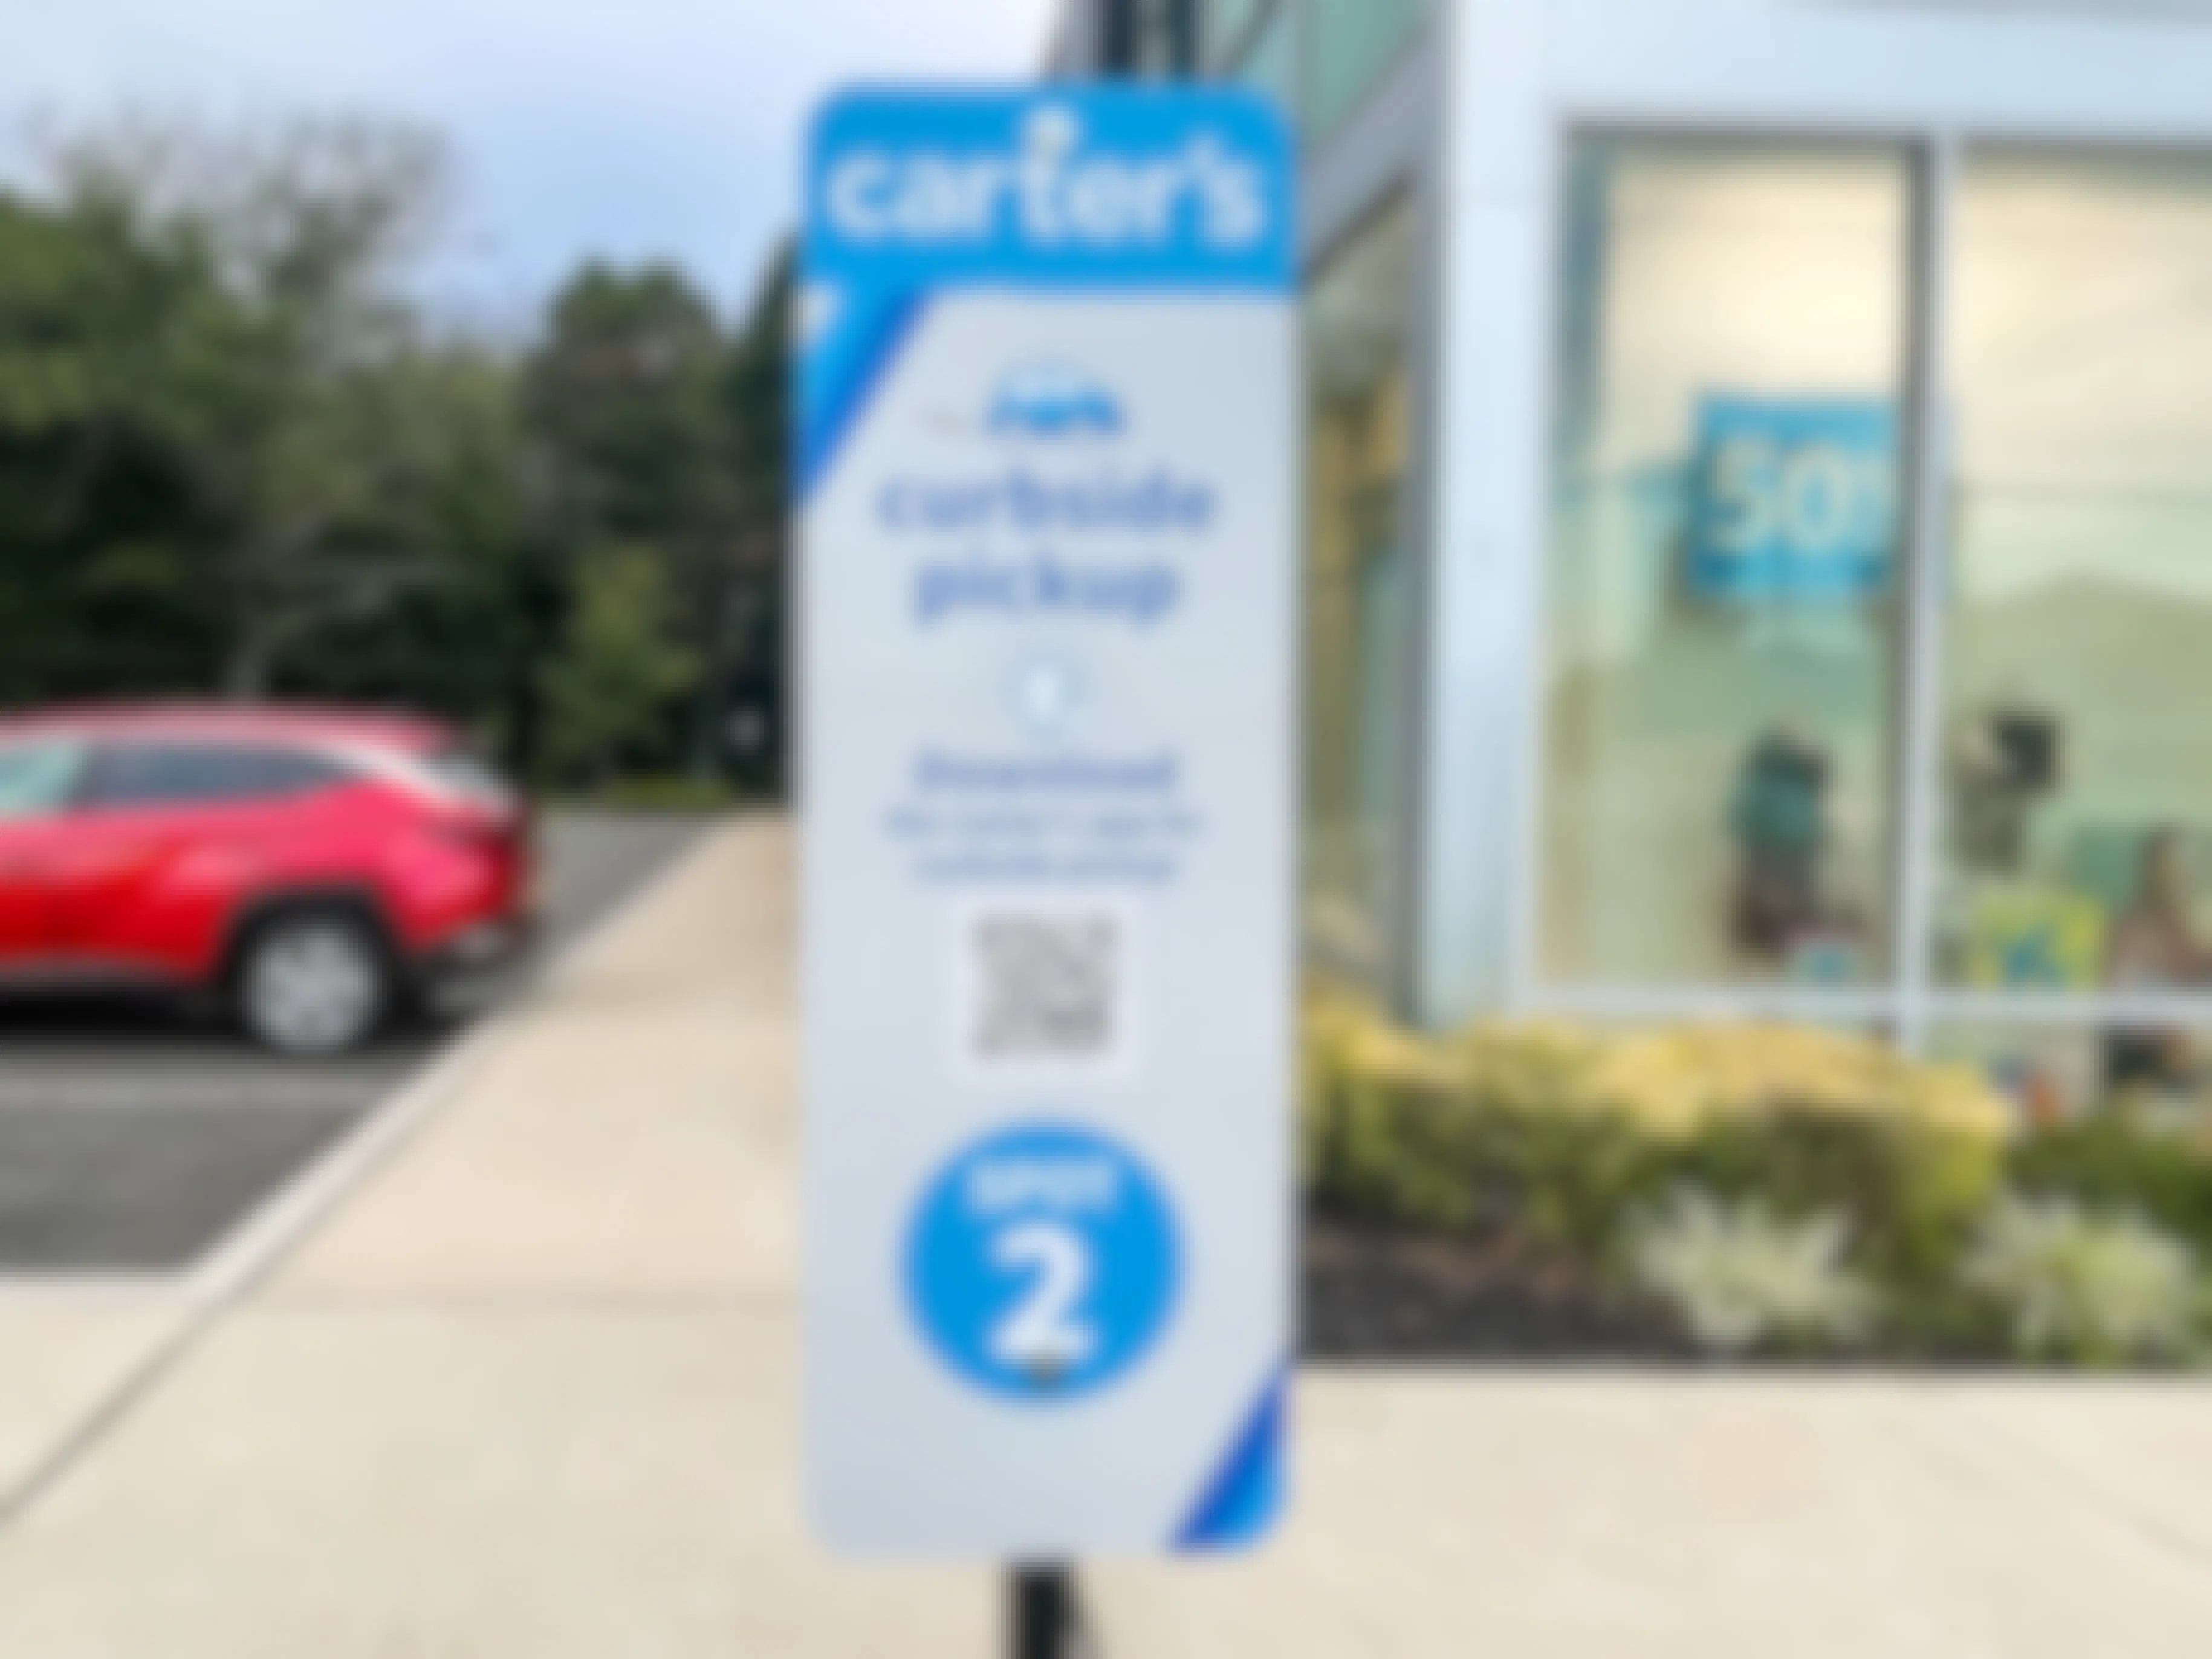 A Carter's online order curbside pickup sign outside of the store.